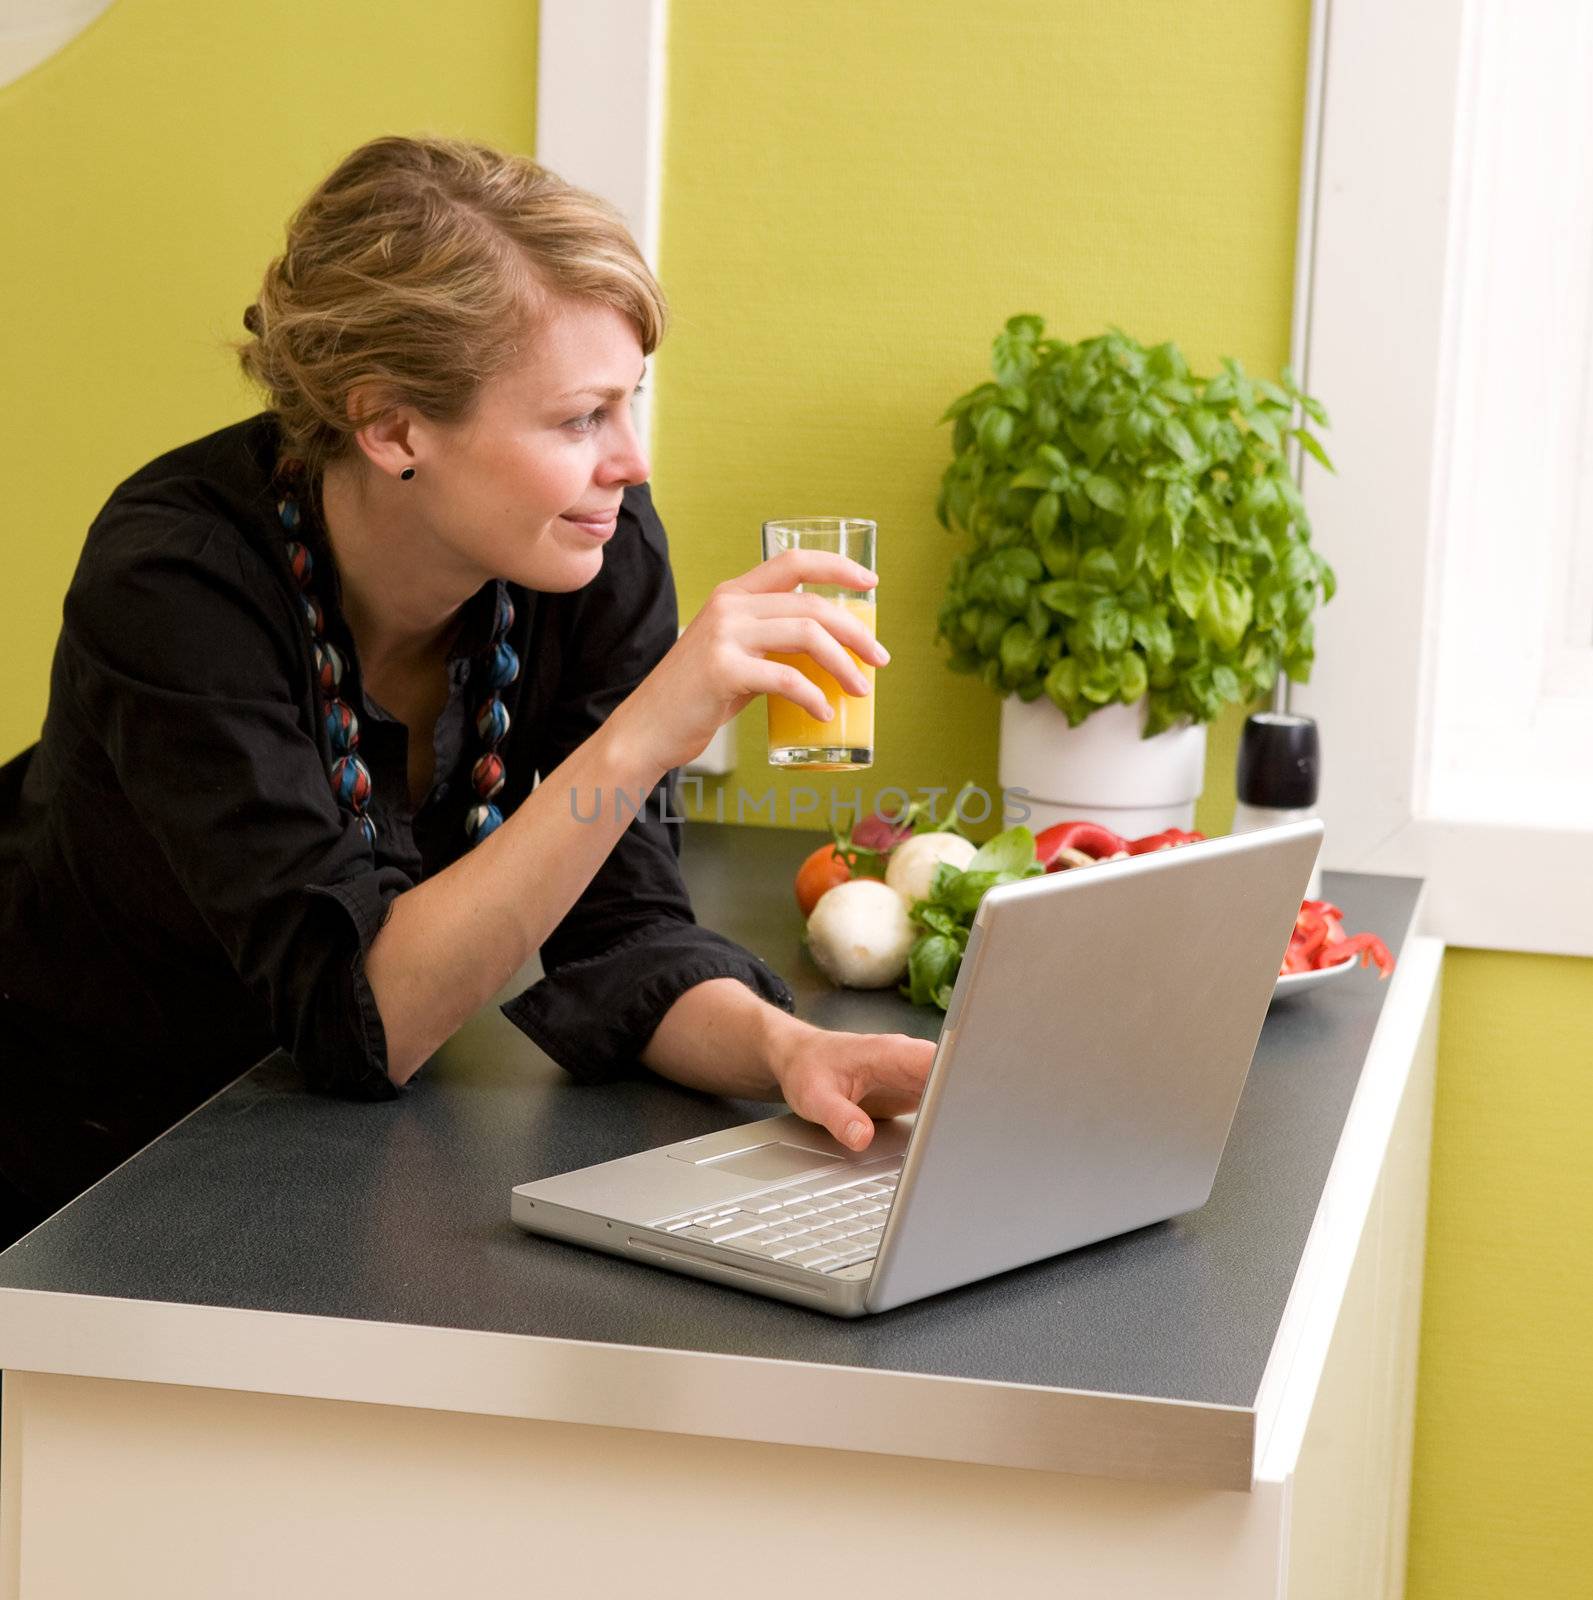 A female eating lunch while using the laptop at home in the kicthen.